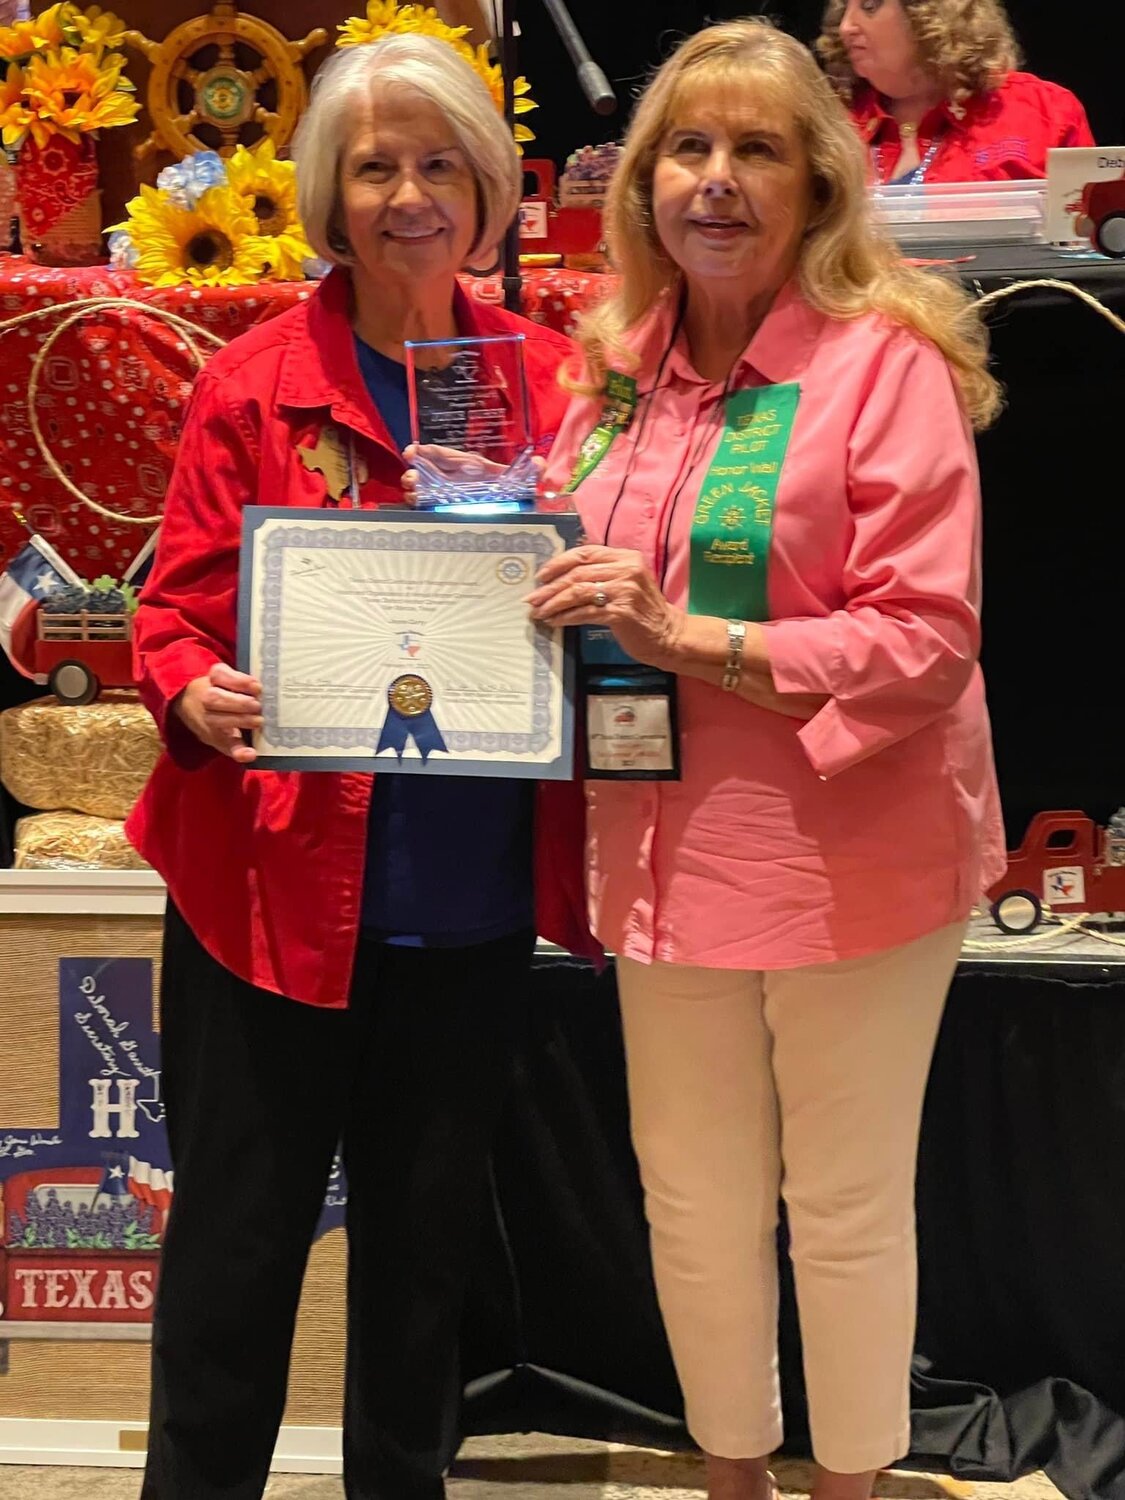 Joyce Curry, right, accepts her wards for 40 years of service to the Texas Anchor Districts of Pilot International.